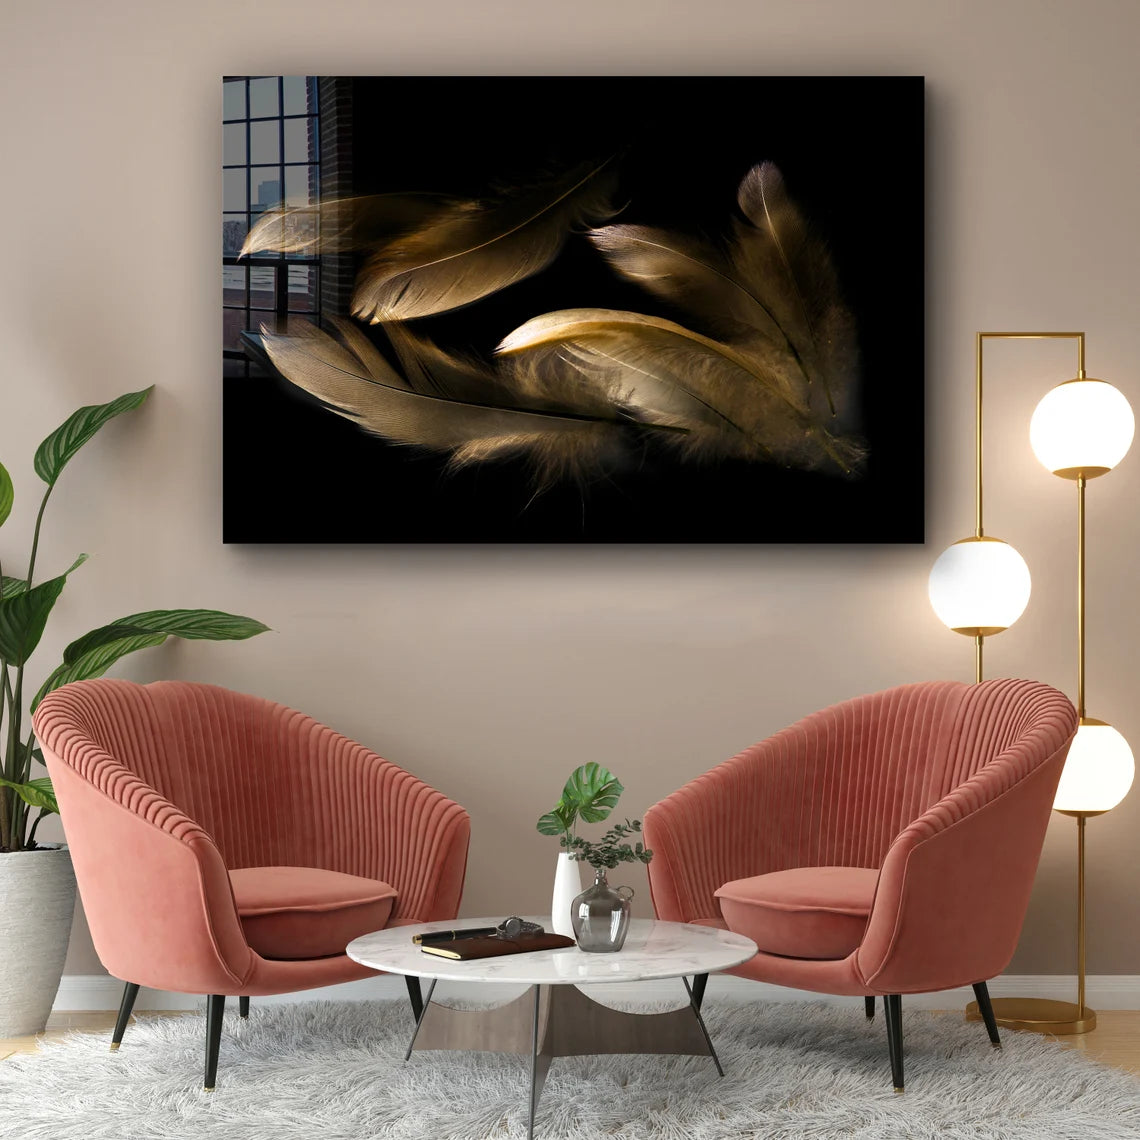 Brown Feathers on Dark Print Tempered Glass Wall Art 100% Made in Australia Ready to Hang